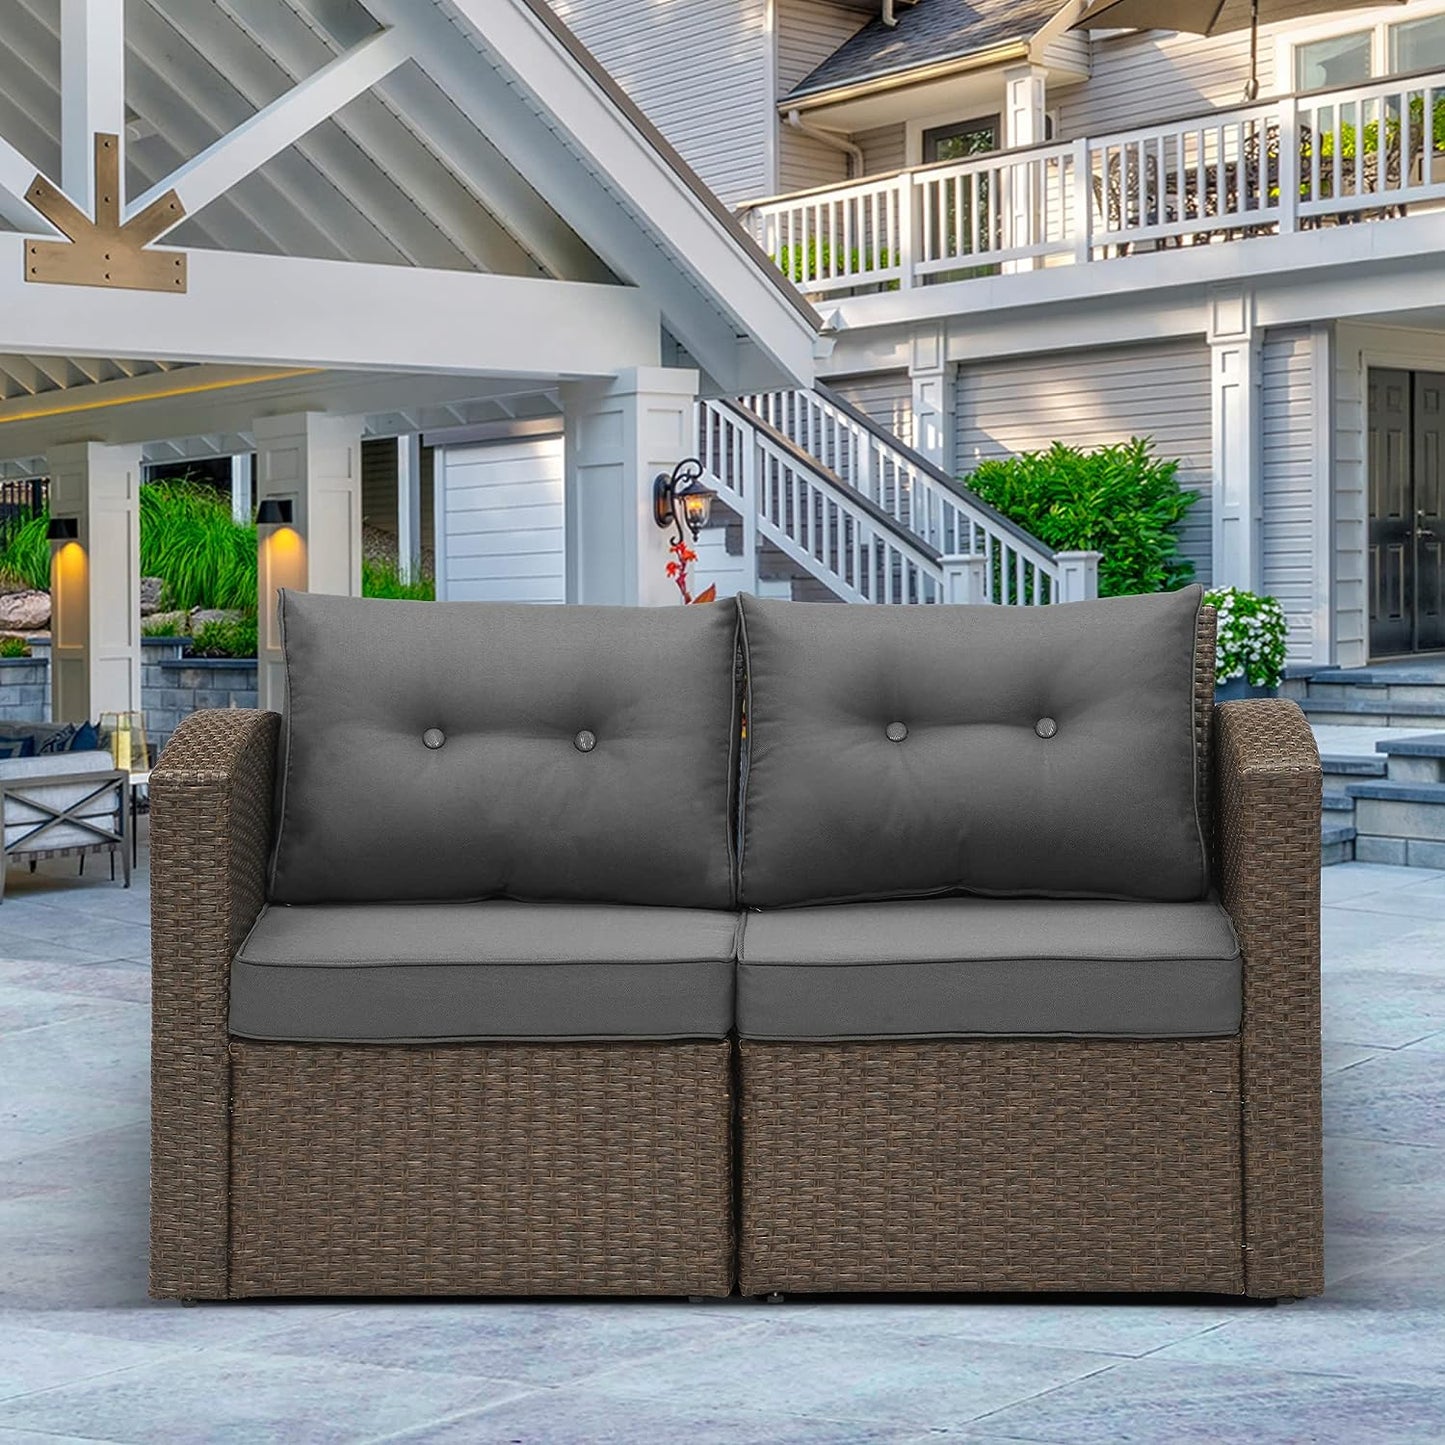 Outdoor Loveseat Patio Furniture Corner Sofa, All-Weather Brown Wicker 2-Piece Rattan Outdoor Sectional Couch Sofa Set with Dark Grey Non-Slip Cushions,Aluminum Frame